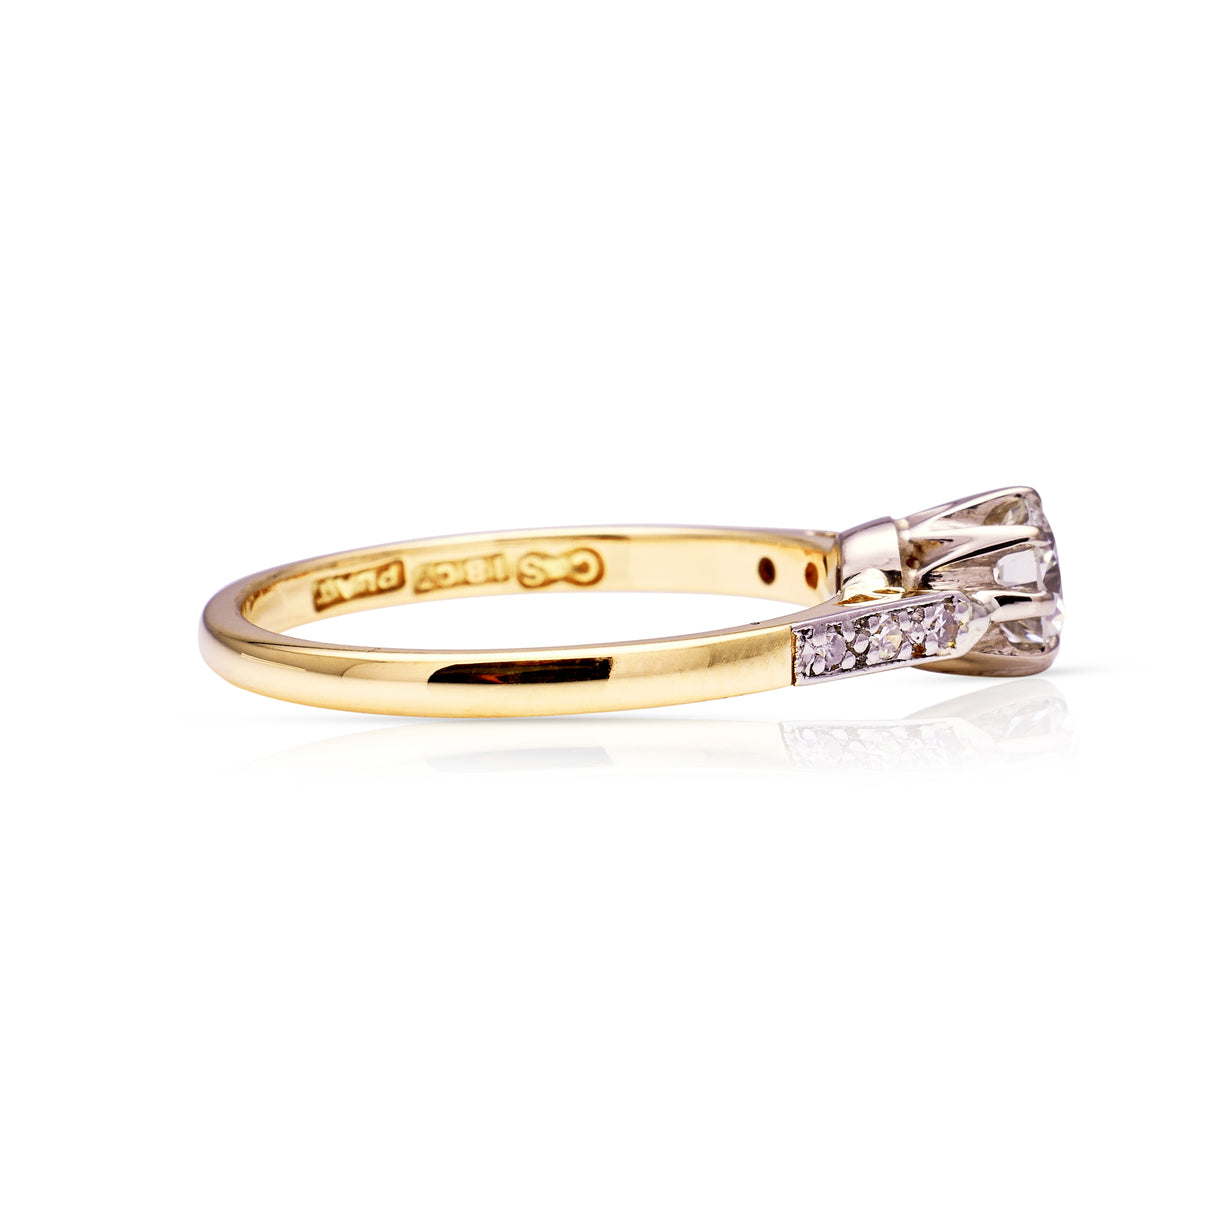 Vintage, Solitaire Diamond Engagement Ring, 18ct Yellow Gold and Platinum